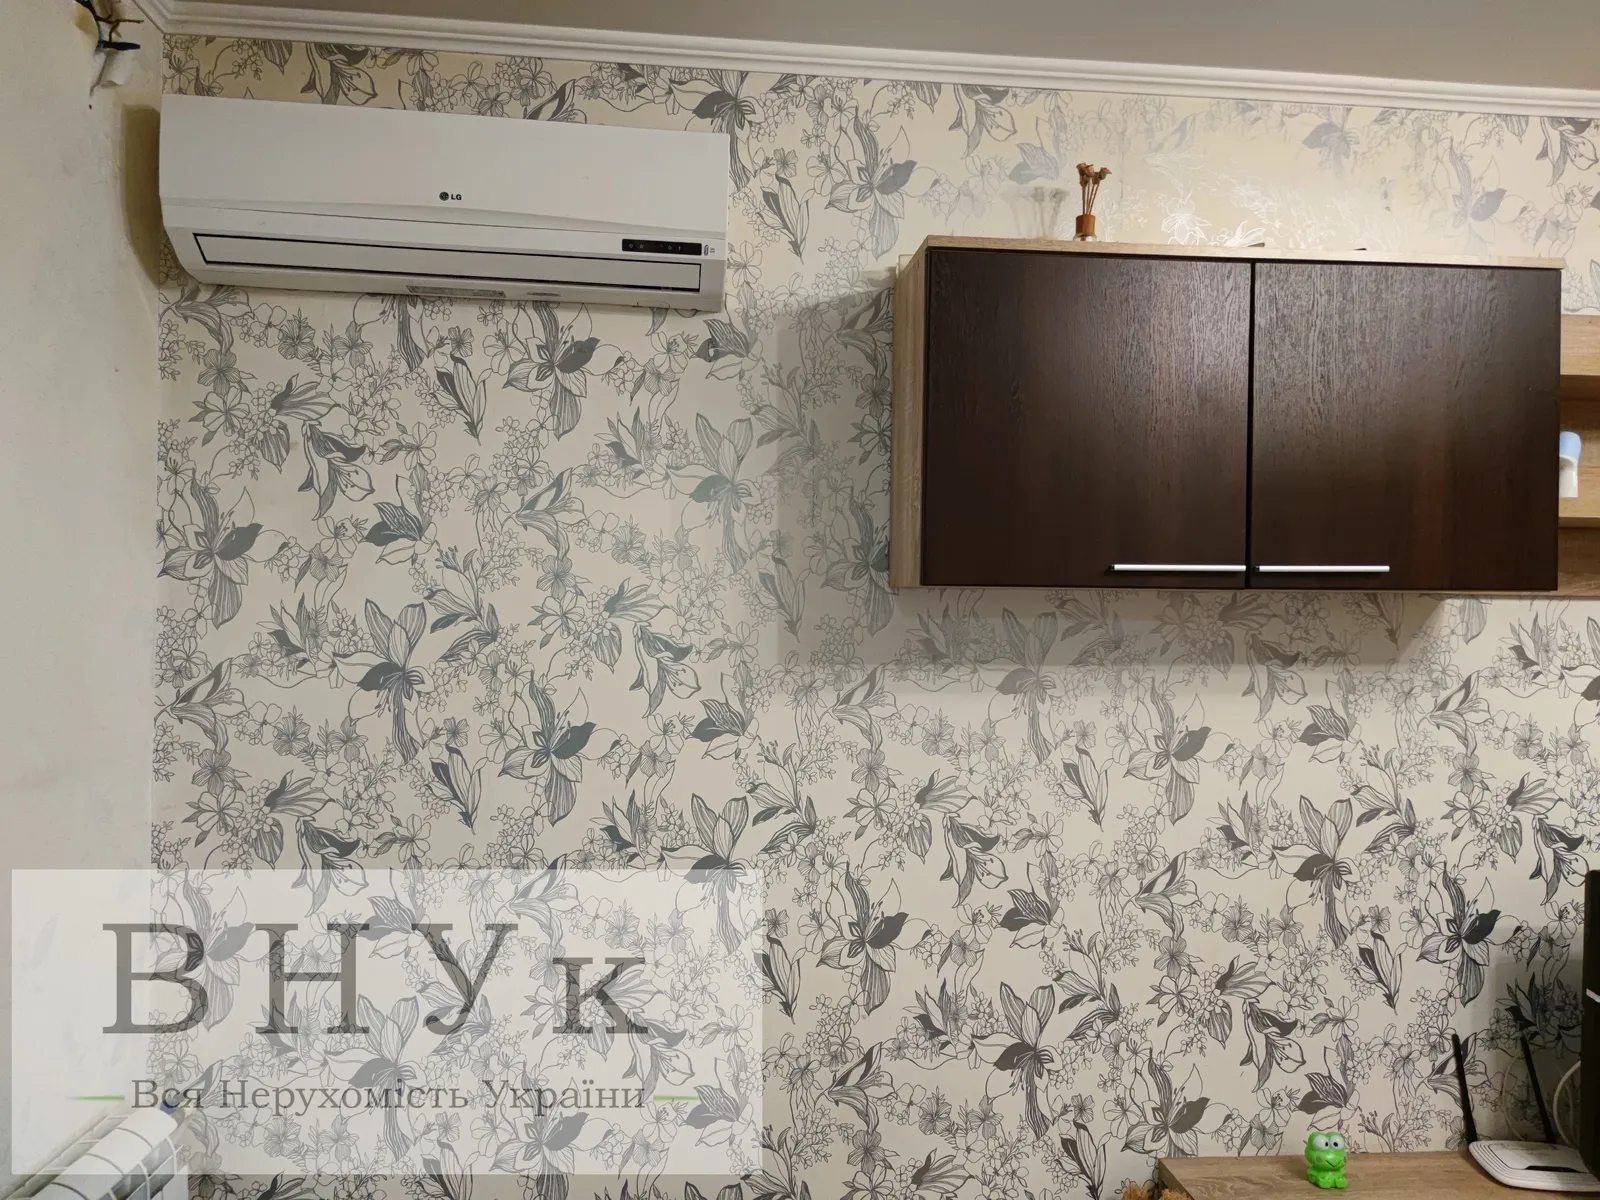 Apartments for sale. 2 rooms, 55 m², 2nd floor/5 floors. Blazhkevych Ivanny , Ternopil. 